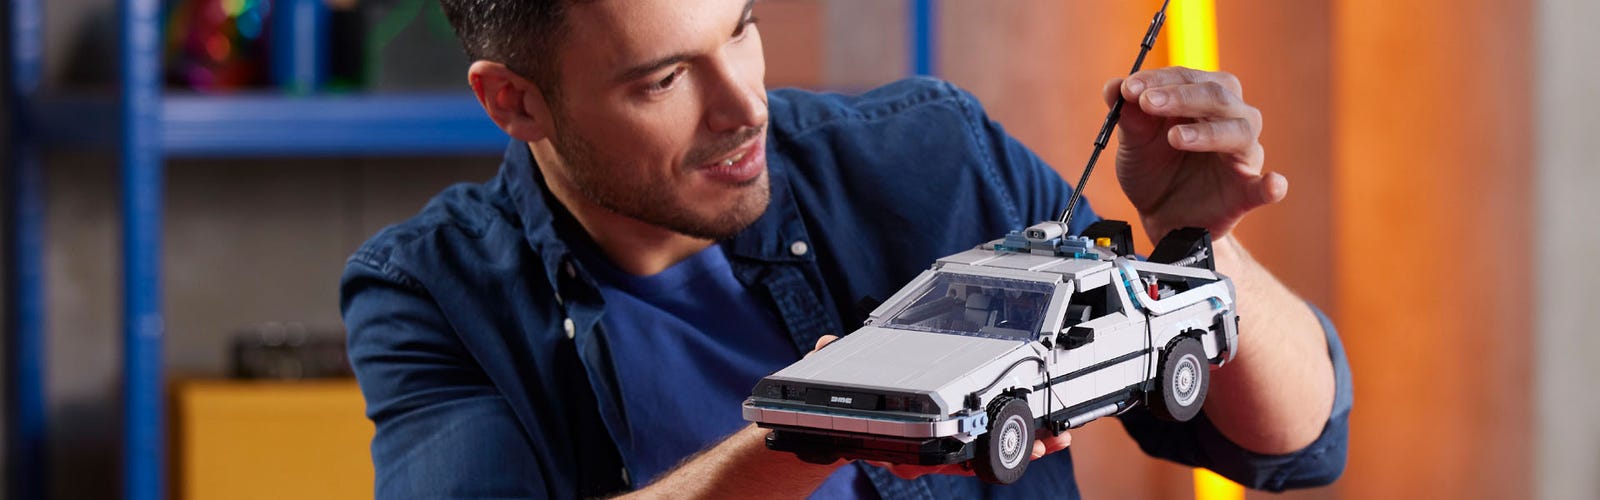 New 'Back to the Future' 3-in-1 DeLorean Time Machine LEGO Set Coming Soon  - WDW News Today